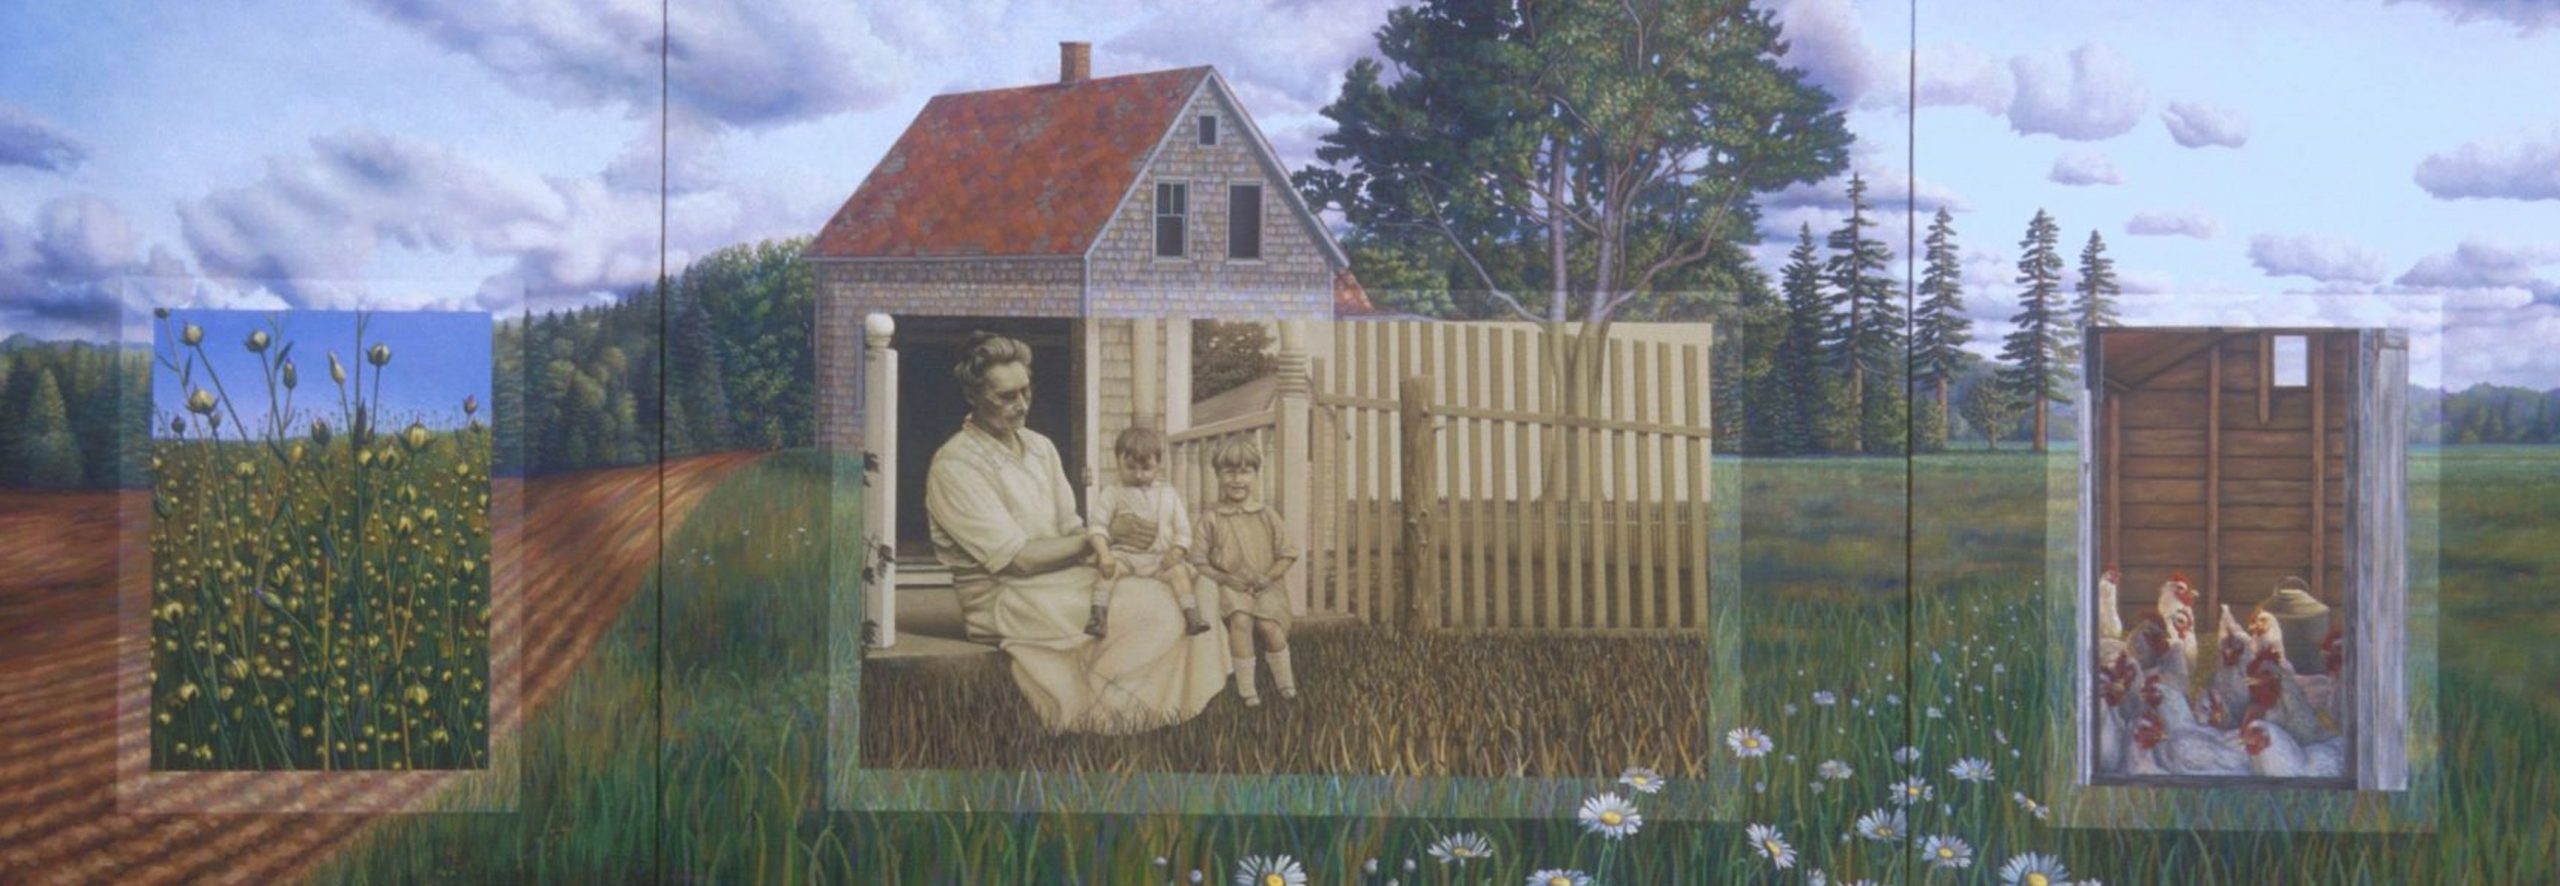 collage showing a farm house, old photo of a mother and children, crops, and chickens